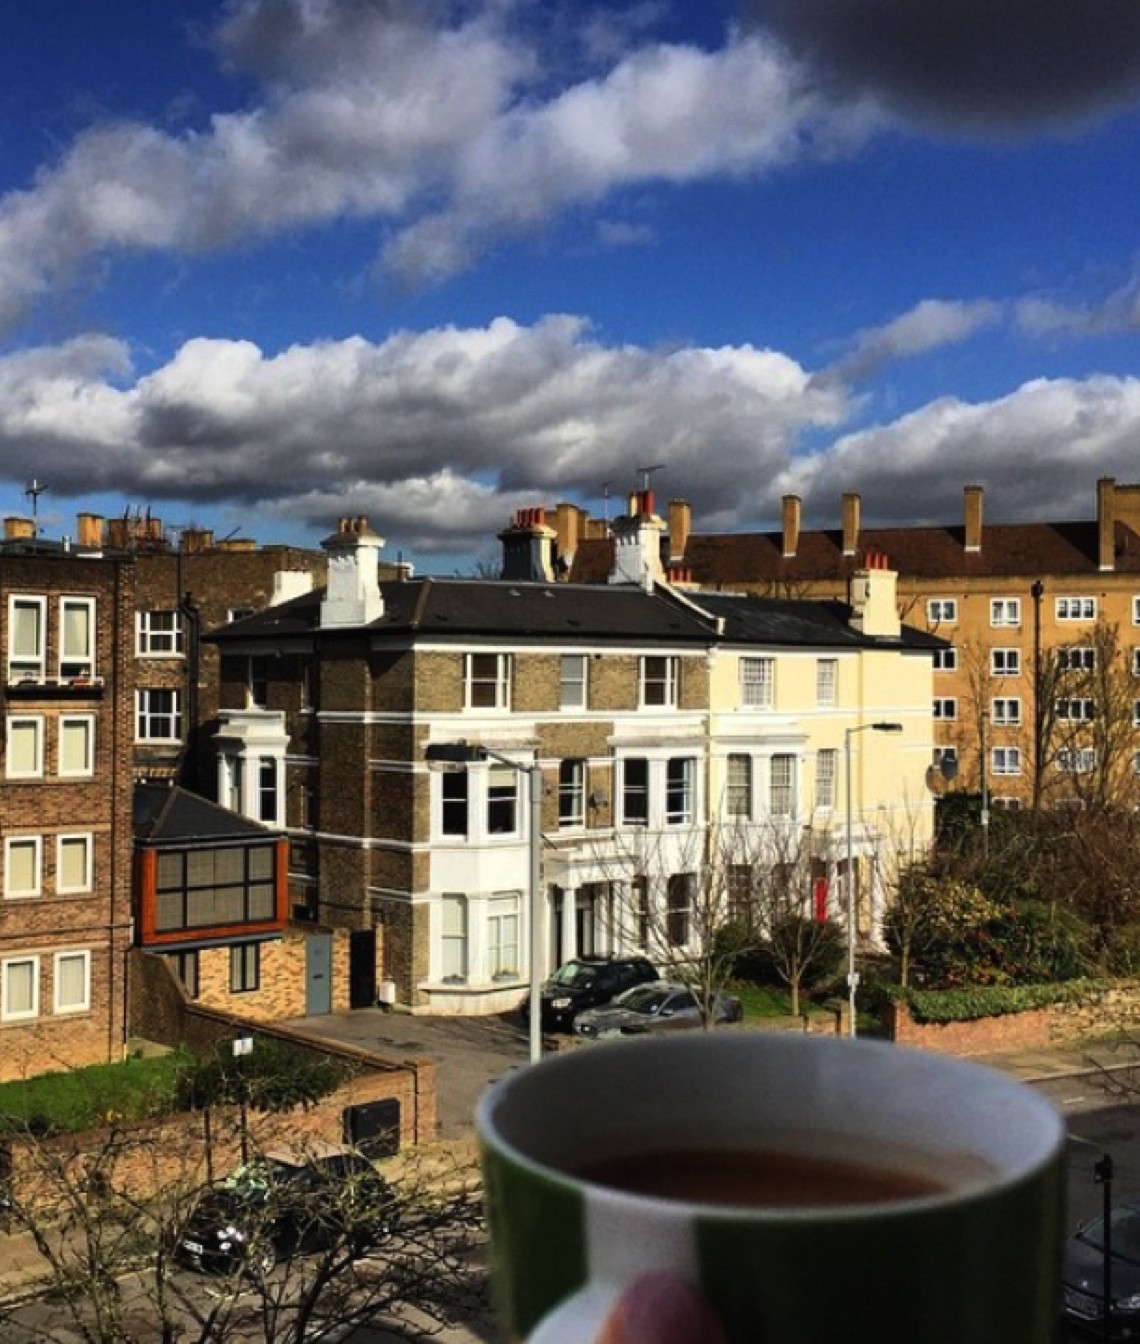 Coffee with the view